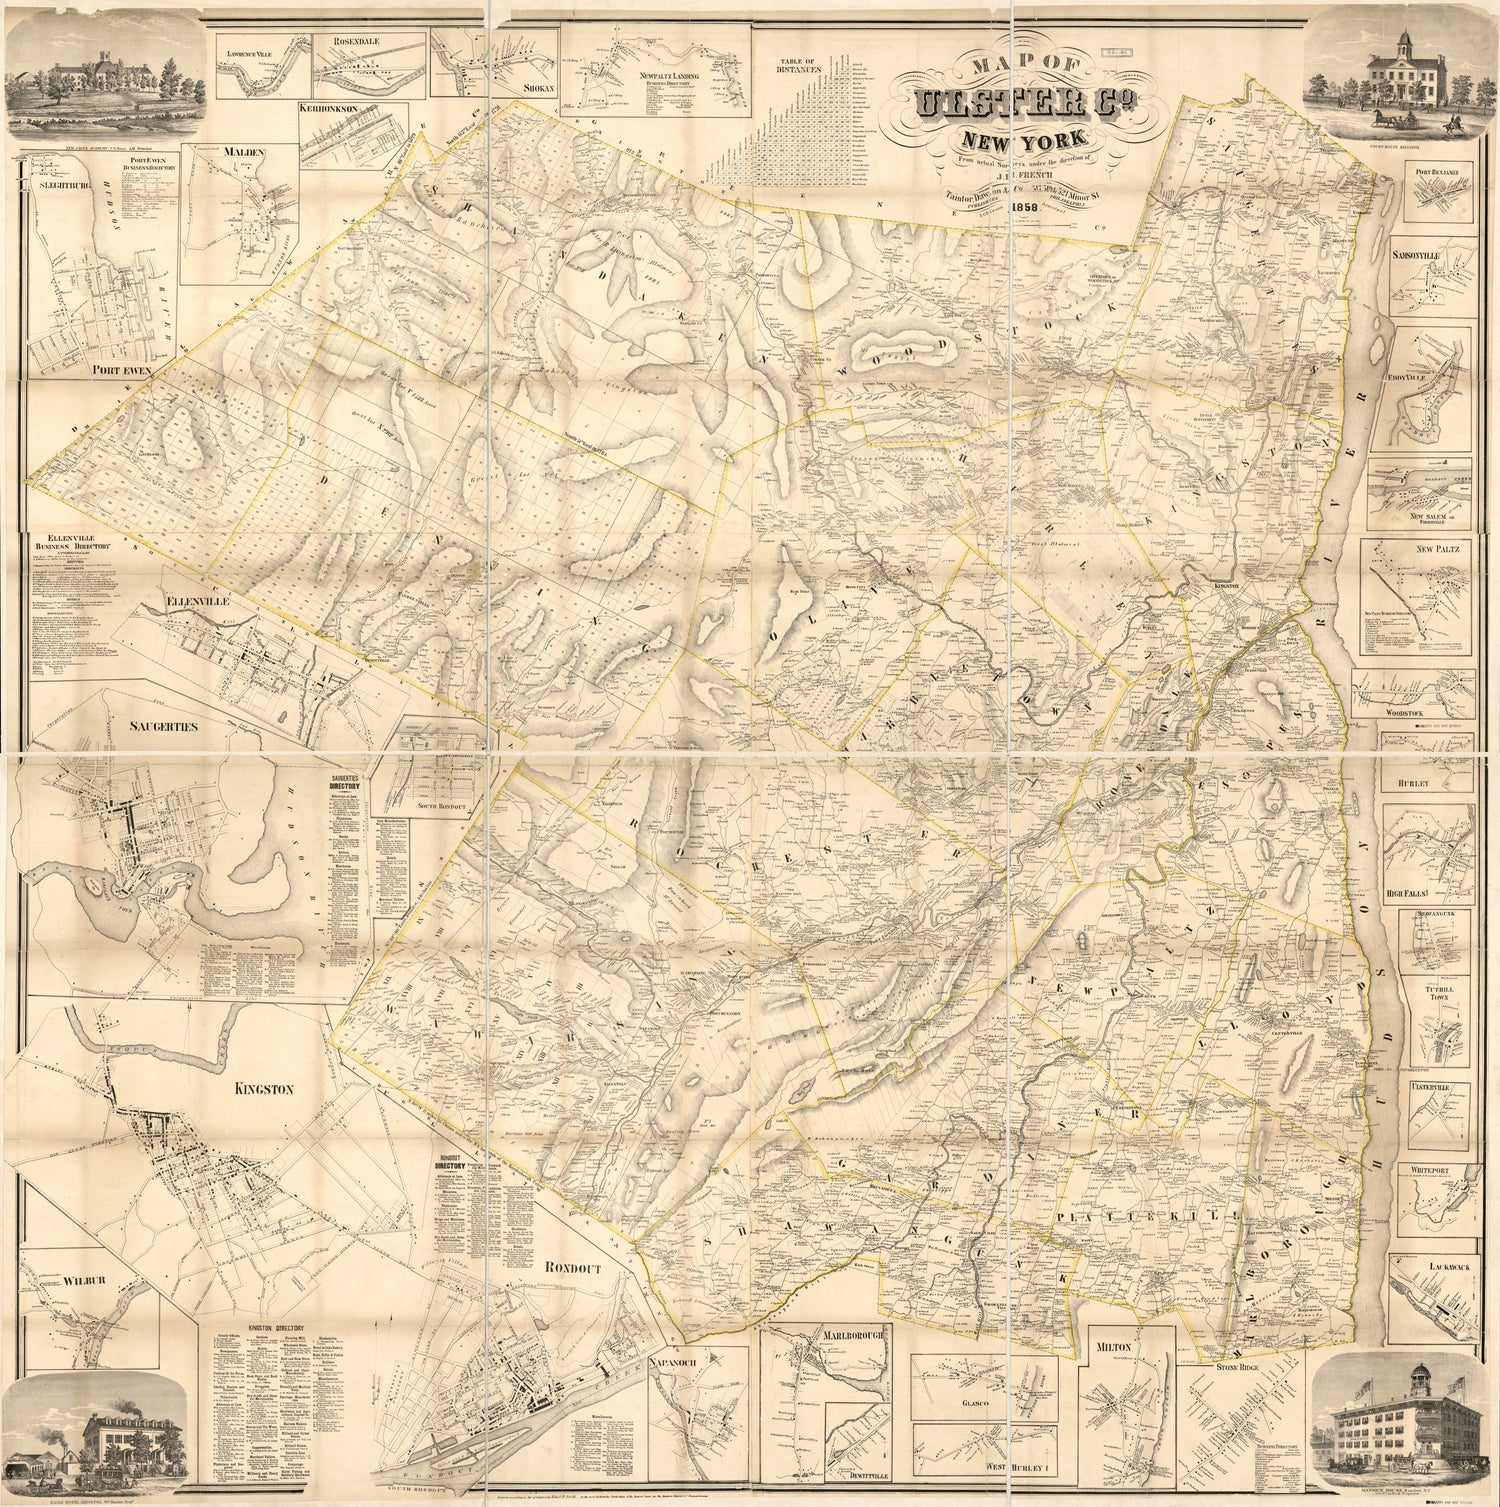 This old map of Map of Ulster Co., New York : from Actual Surveys from 1858 was created by L. G. Dawson, J. H. (John Homer) French, Robert Pearsall Smith, Dawson &amp; Co Taintor in 1858